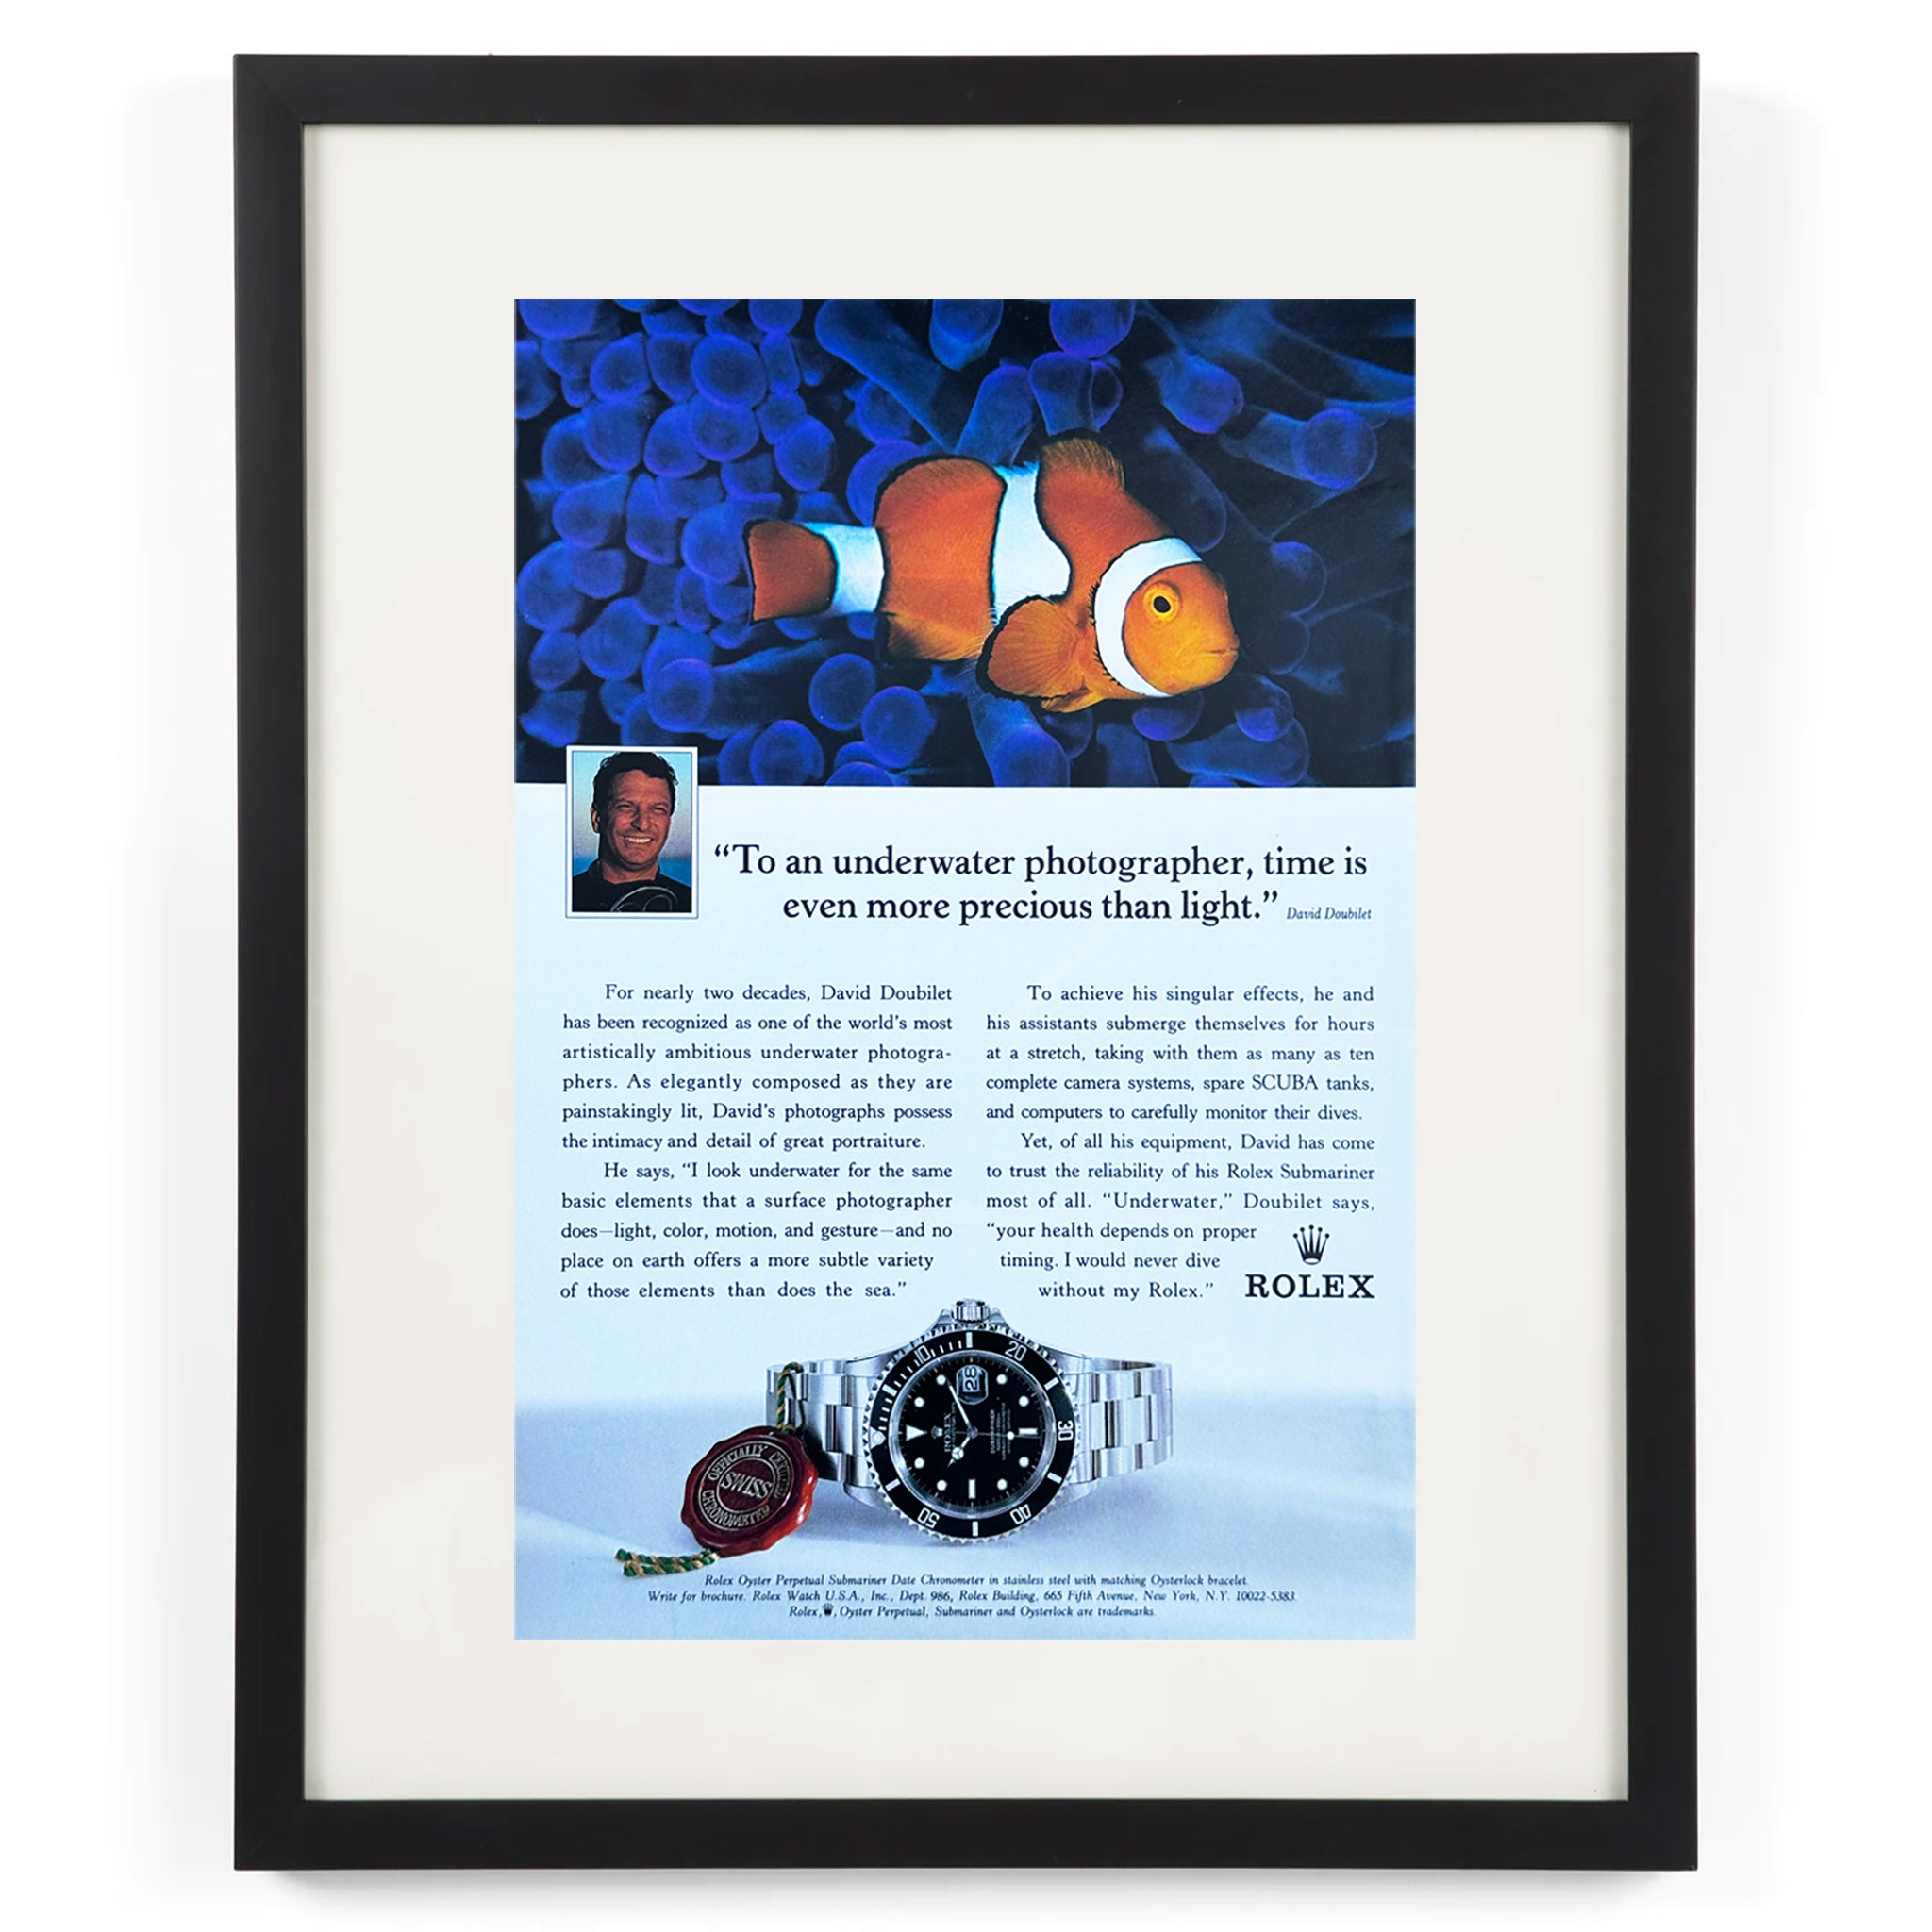 Framed Rolex Submariner Time More Precious than Light Advertisement